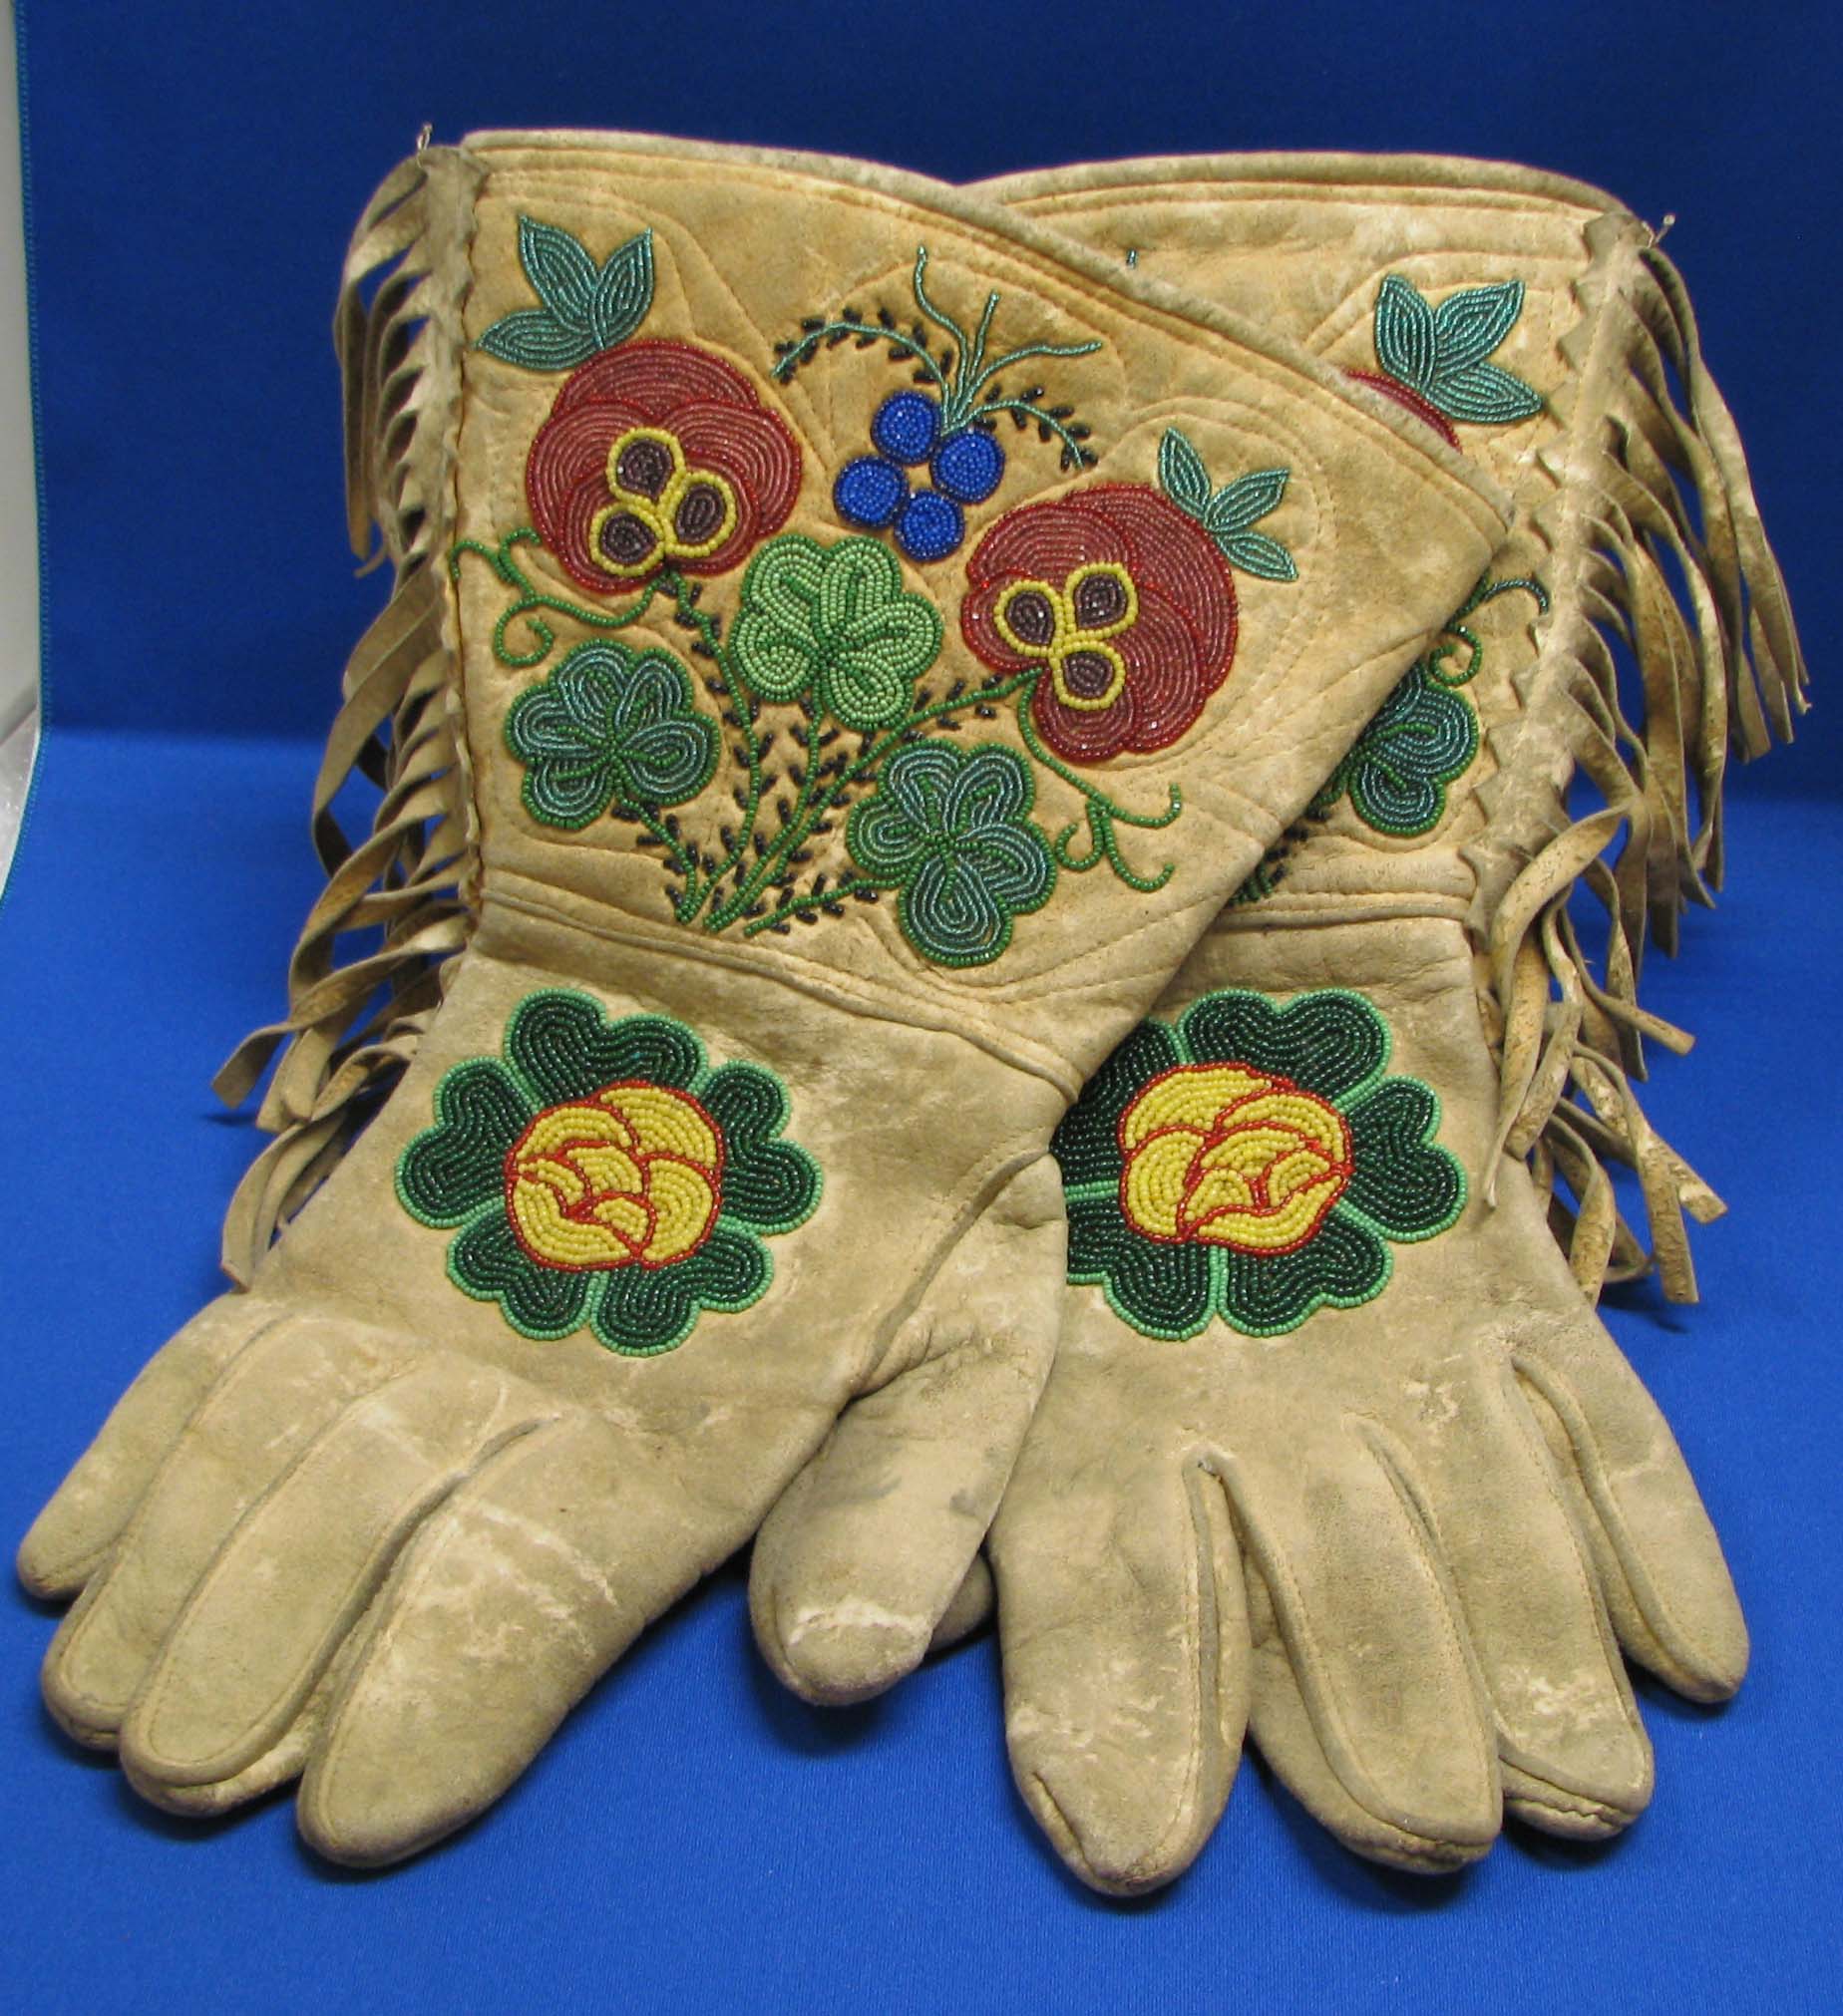 a%20pair%20of%20leather%20gloves%20beaded%20with%20a%20floral%20design